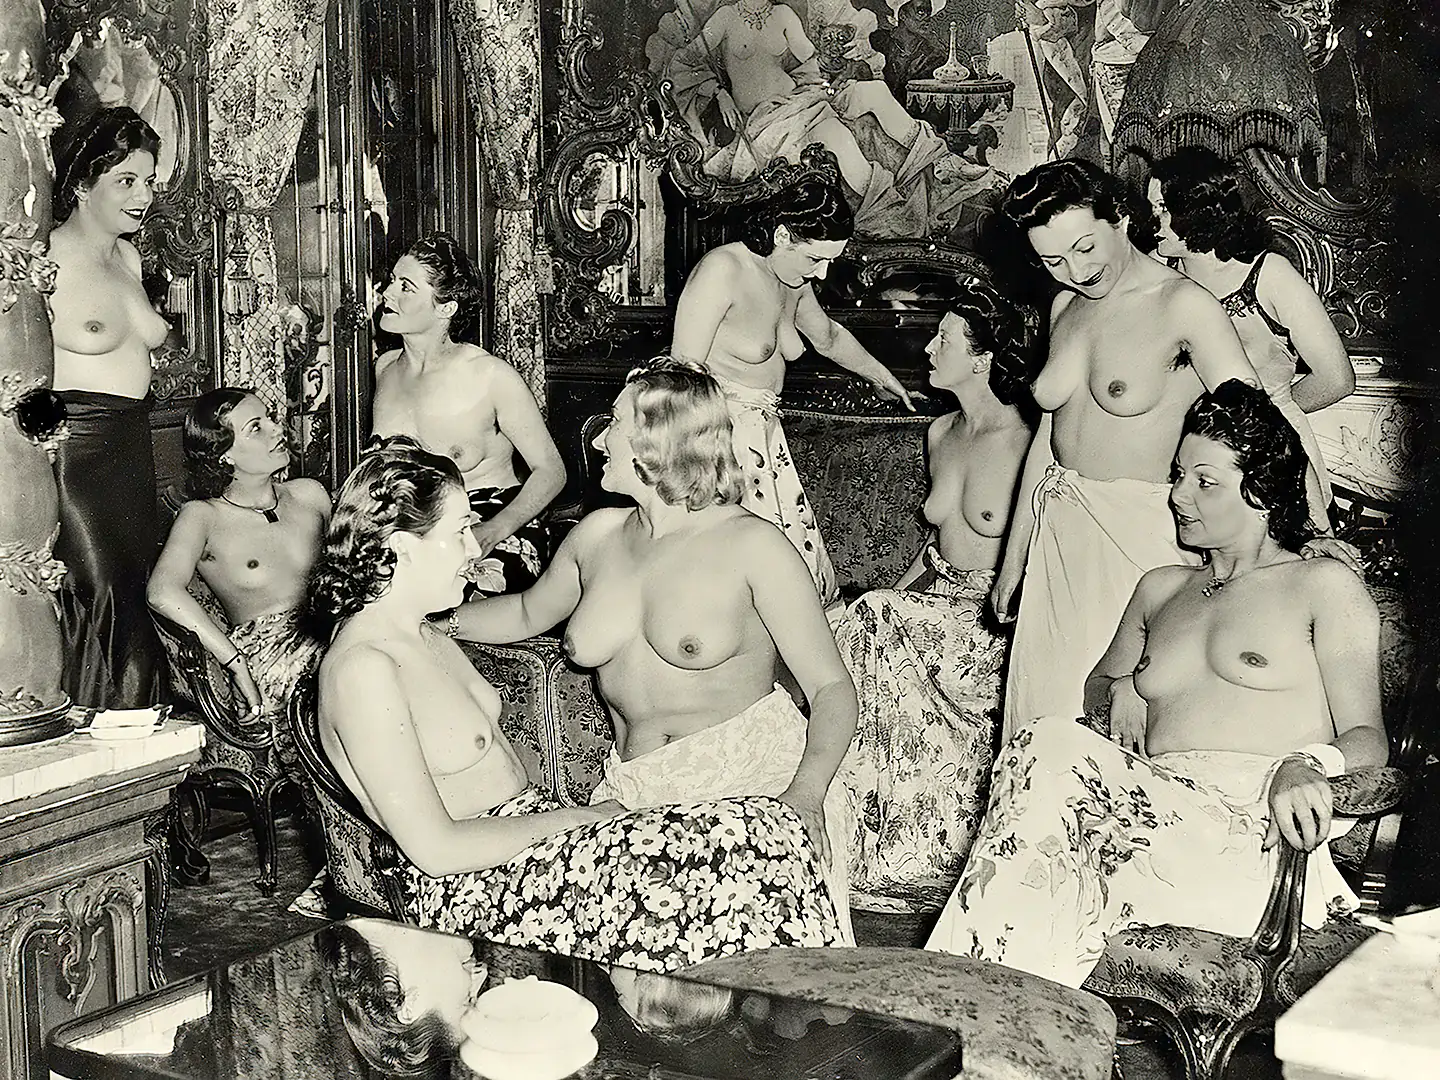 Vintage burlesque porn videos with 10 topless women with beautiful tits talking and waiting for a group sex orgy